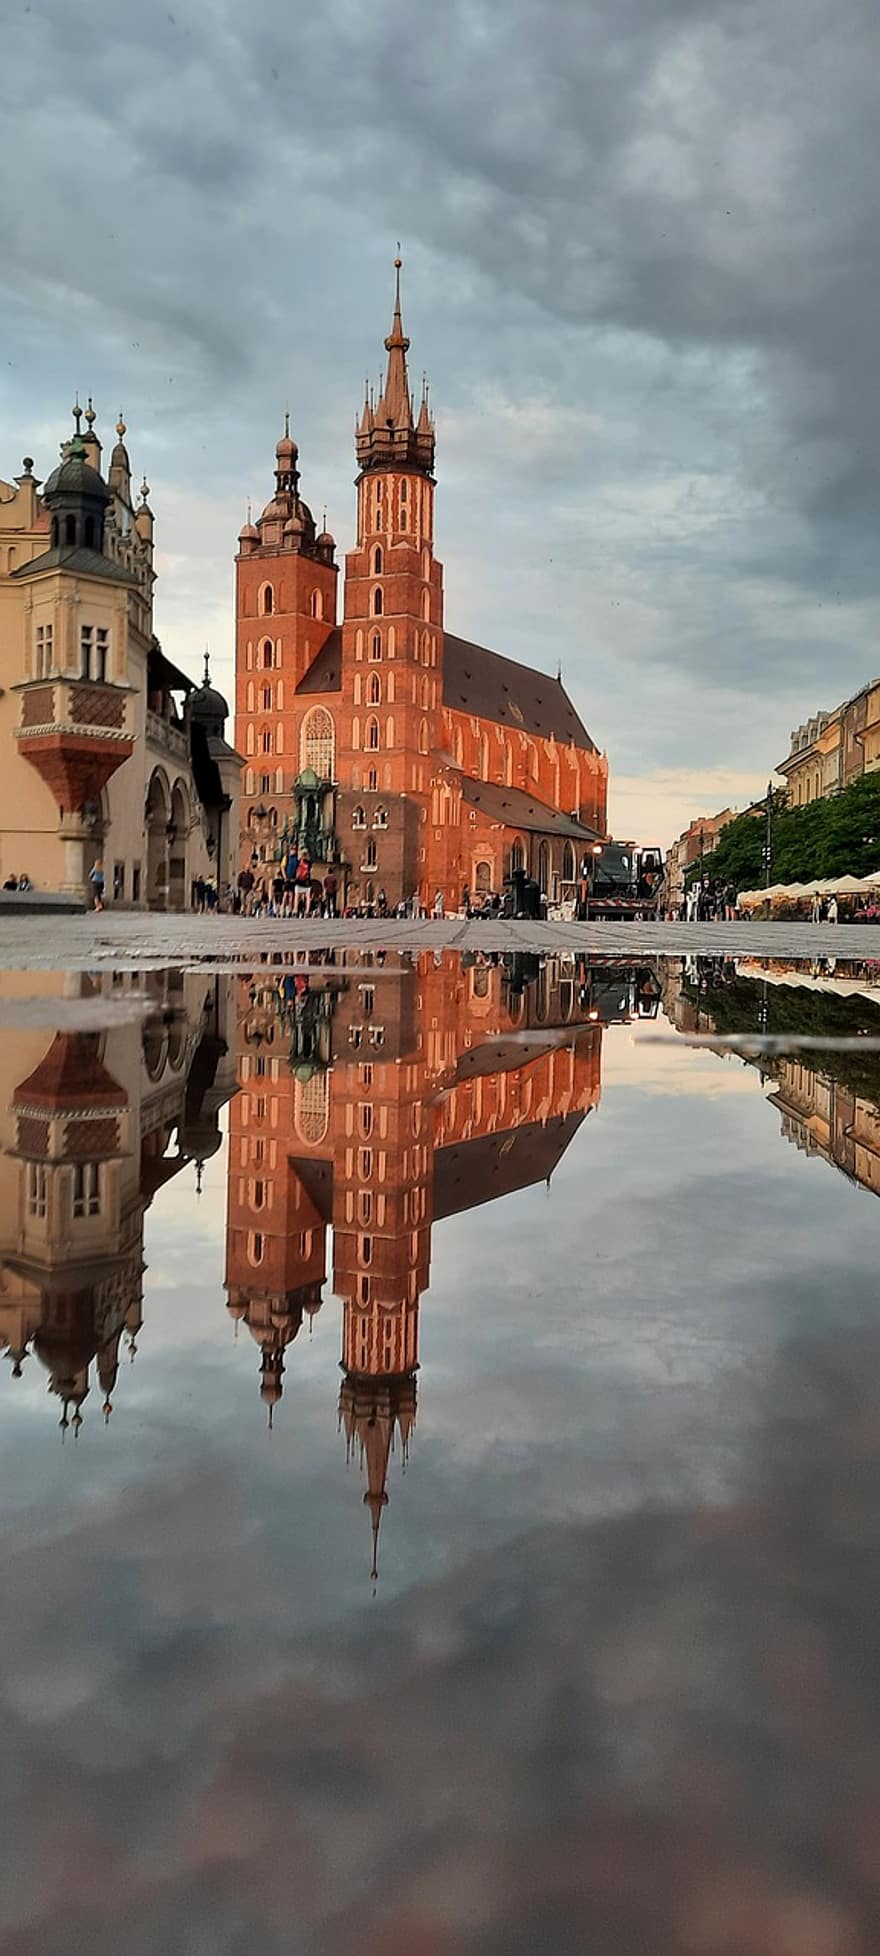 Krakow, Poland, Puddle, City, Water, Reflection, St Mary's Basilica, Church, Buildings, Market Square, Urban